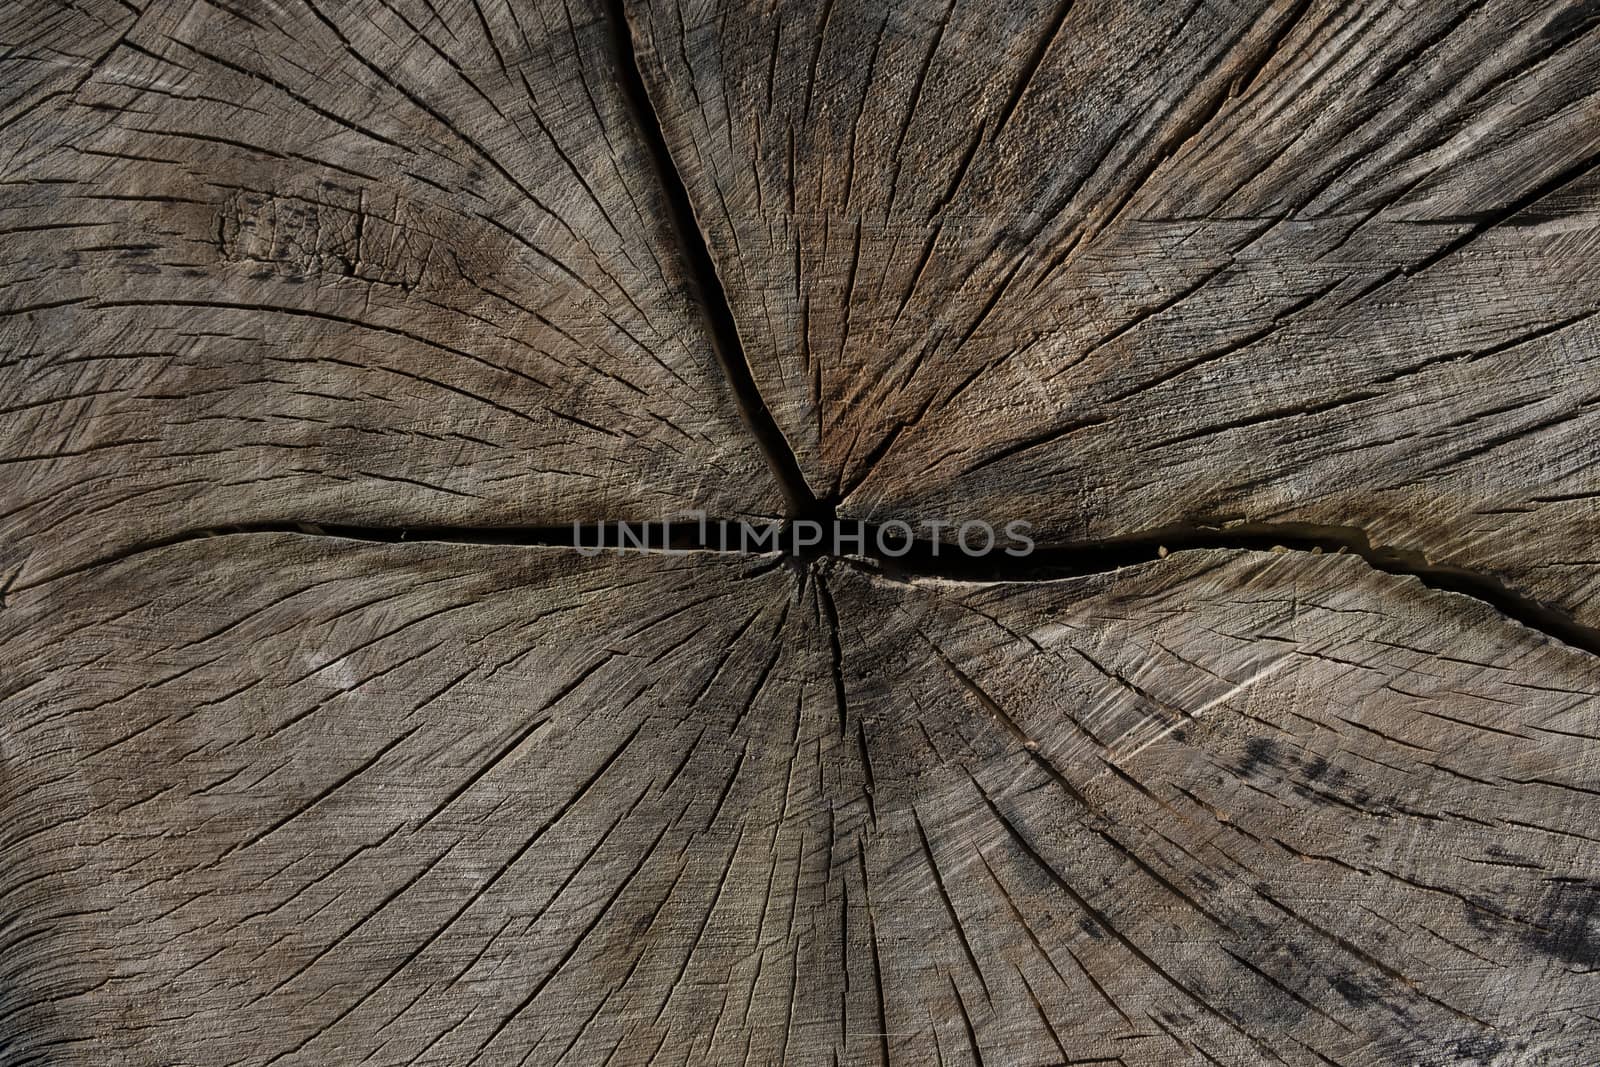 Wooden background of cut tree trunk, close-up